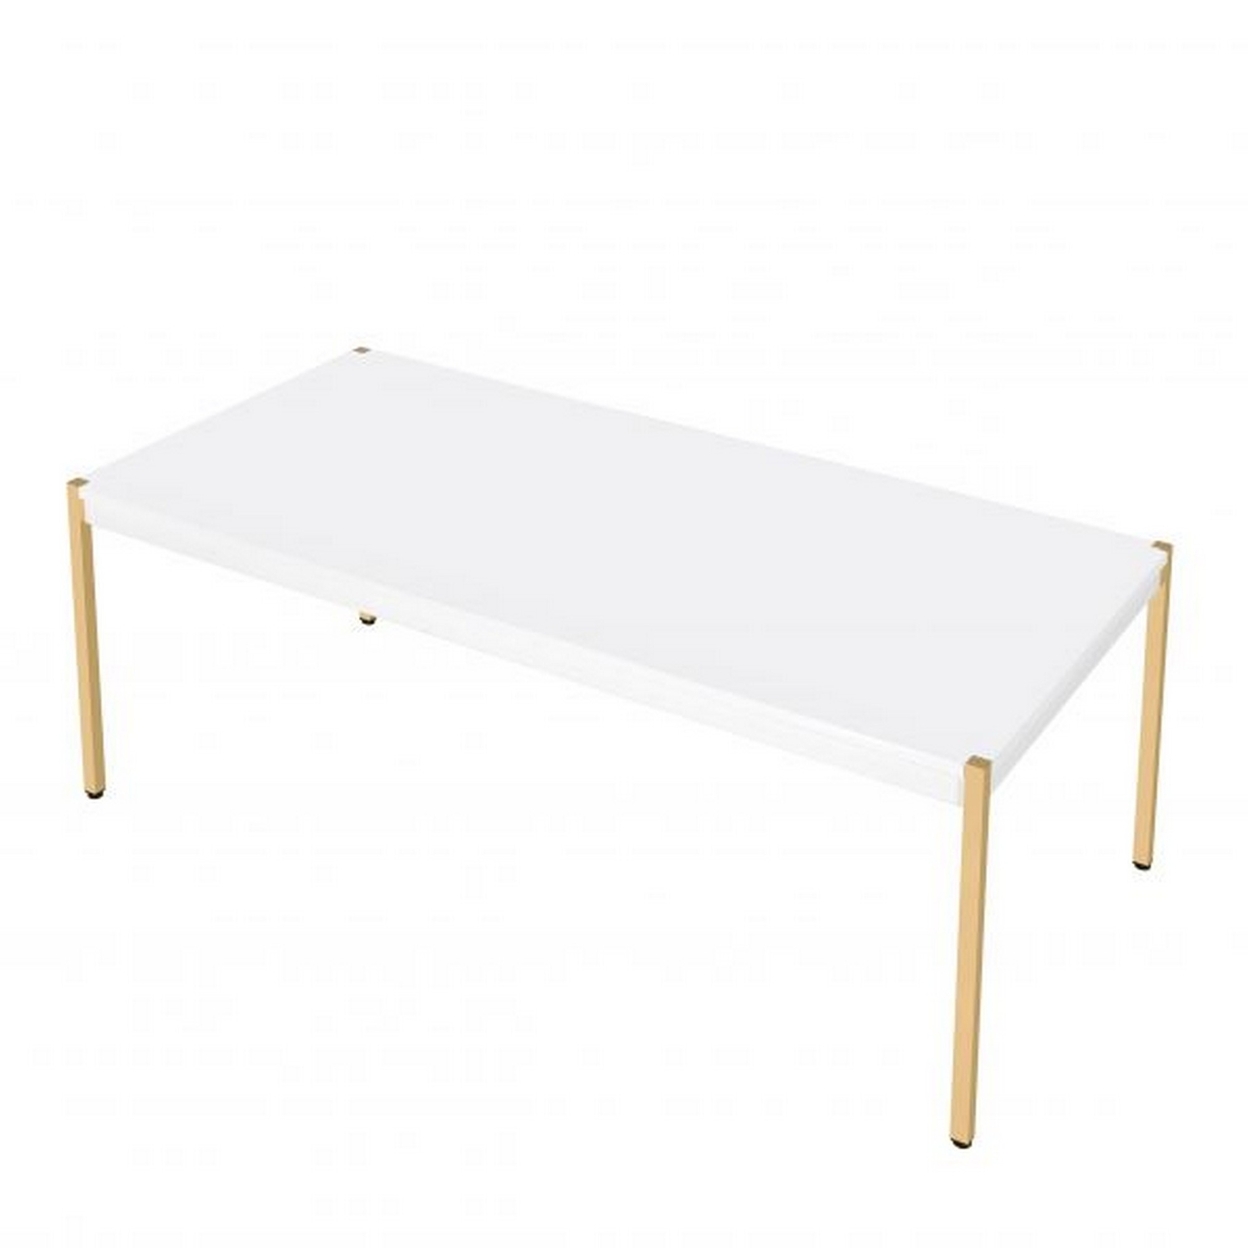 Coffee Table With Metal Tube Legs, White And Gold- Saltoro Sherpi